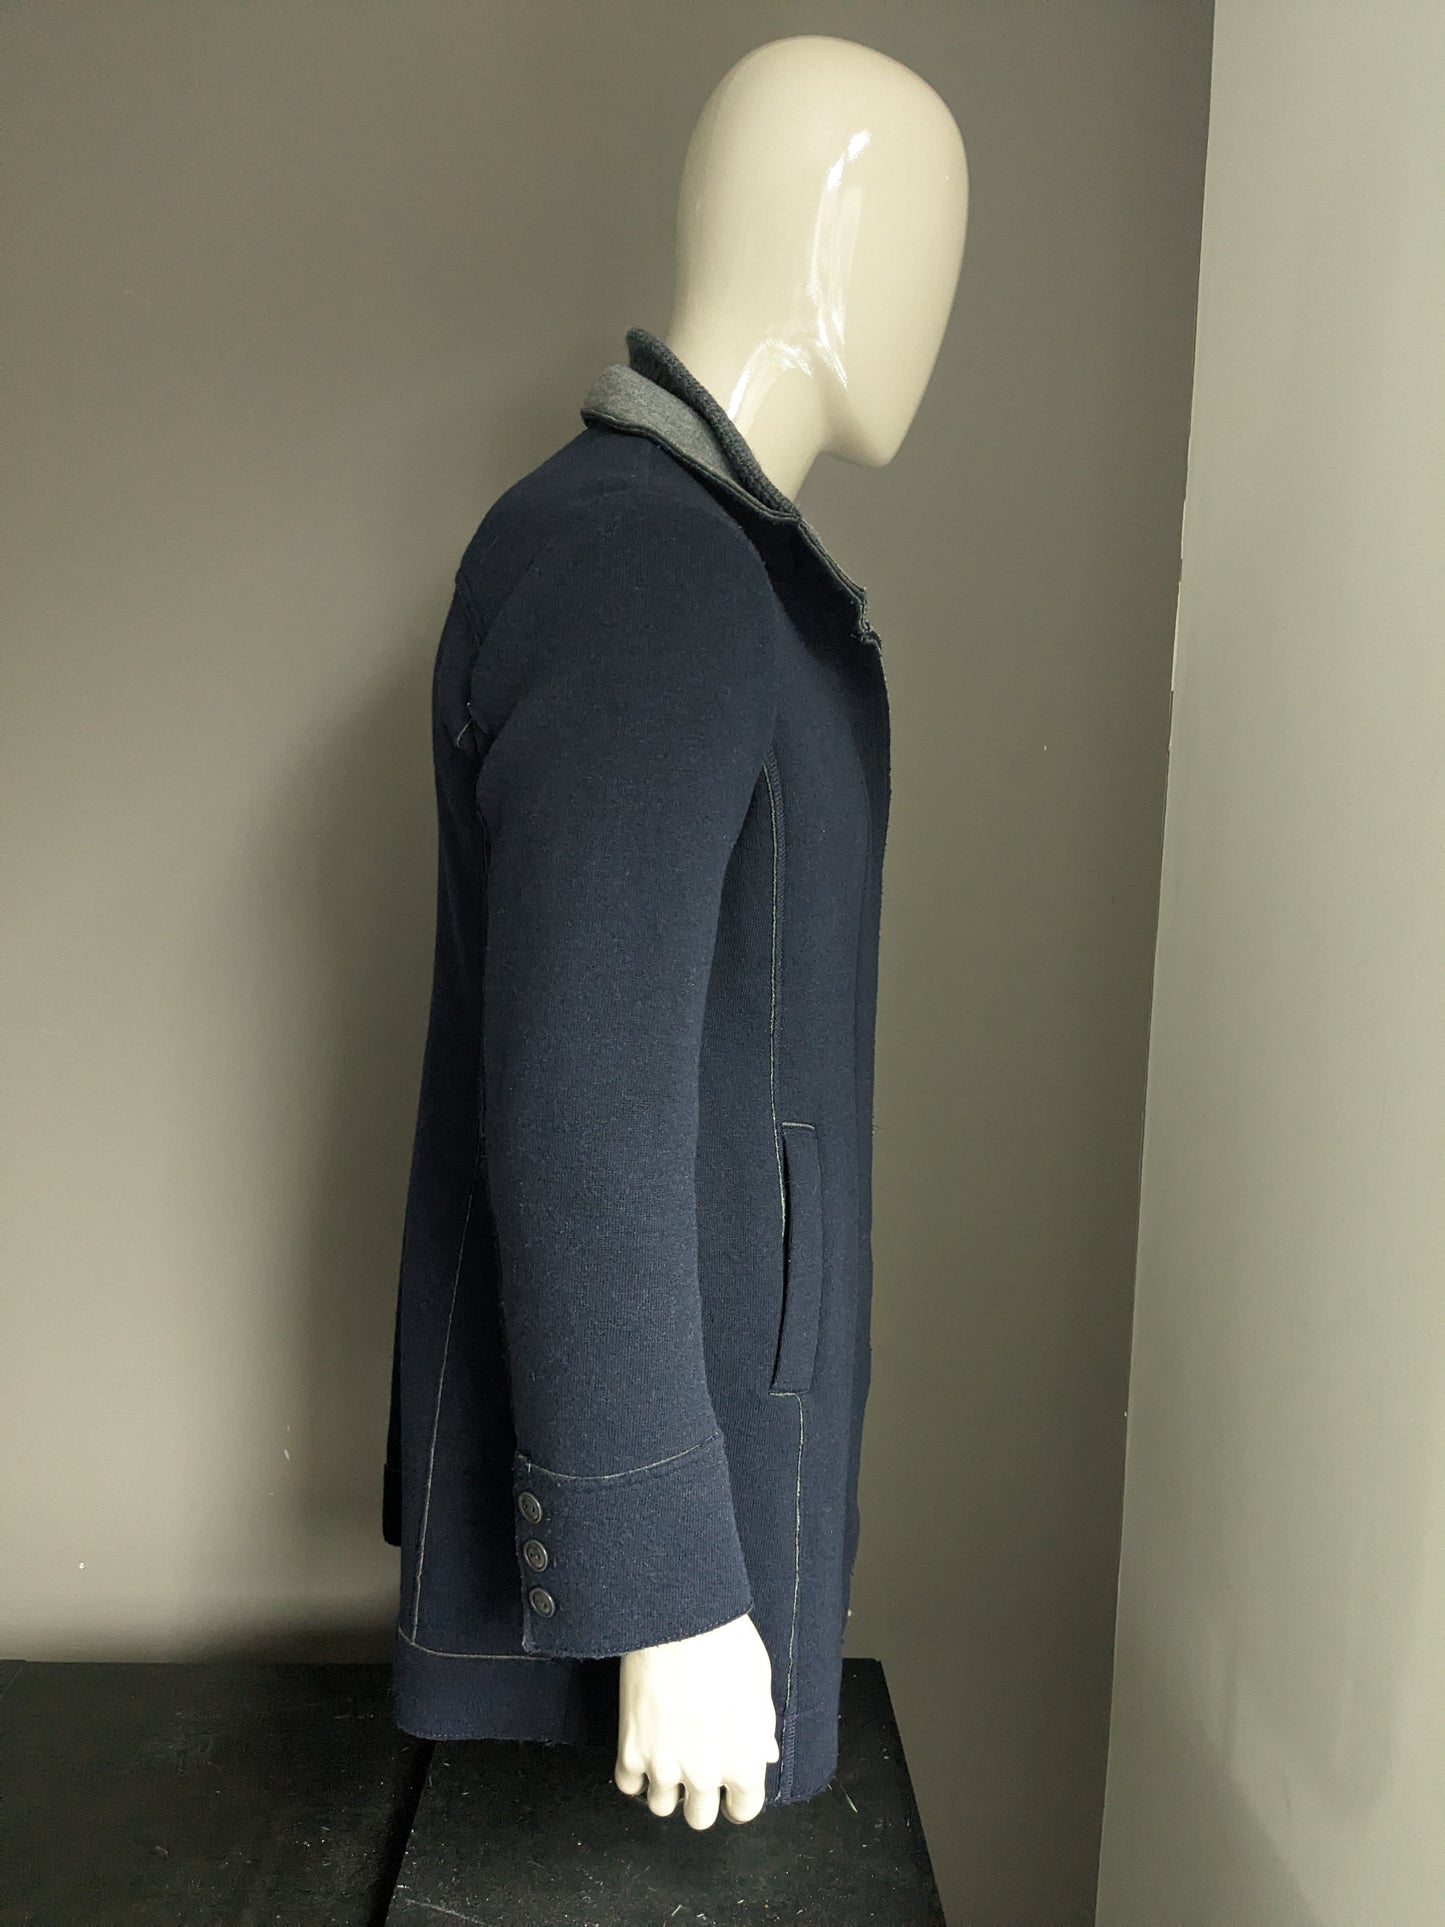 Marc O'Polo Half -length wools between jacket with buttons. Dark blue colored. Size 50 / M.